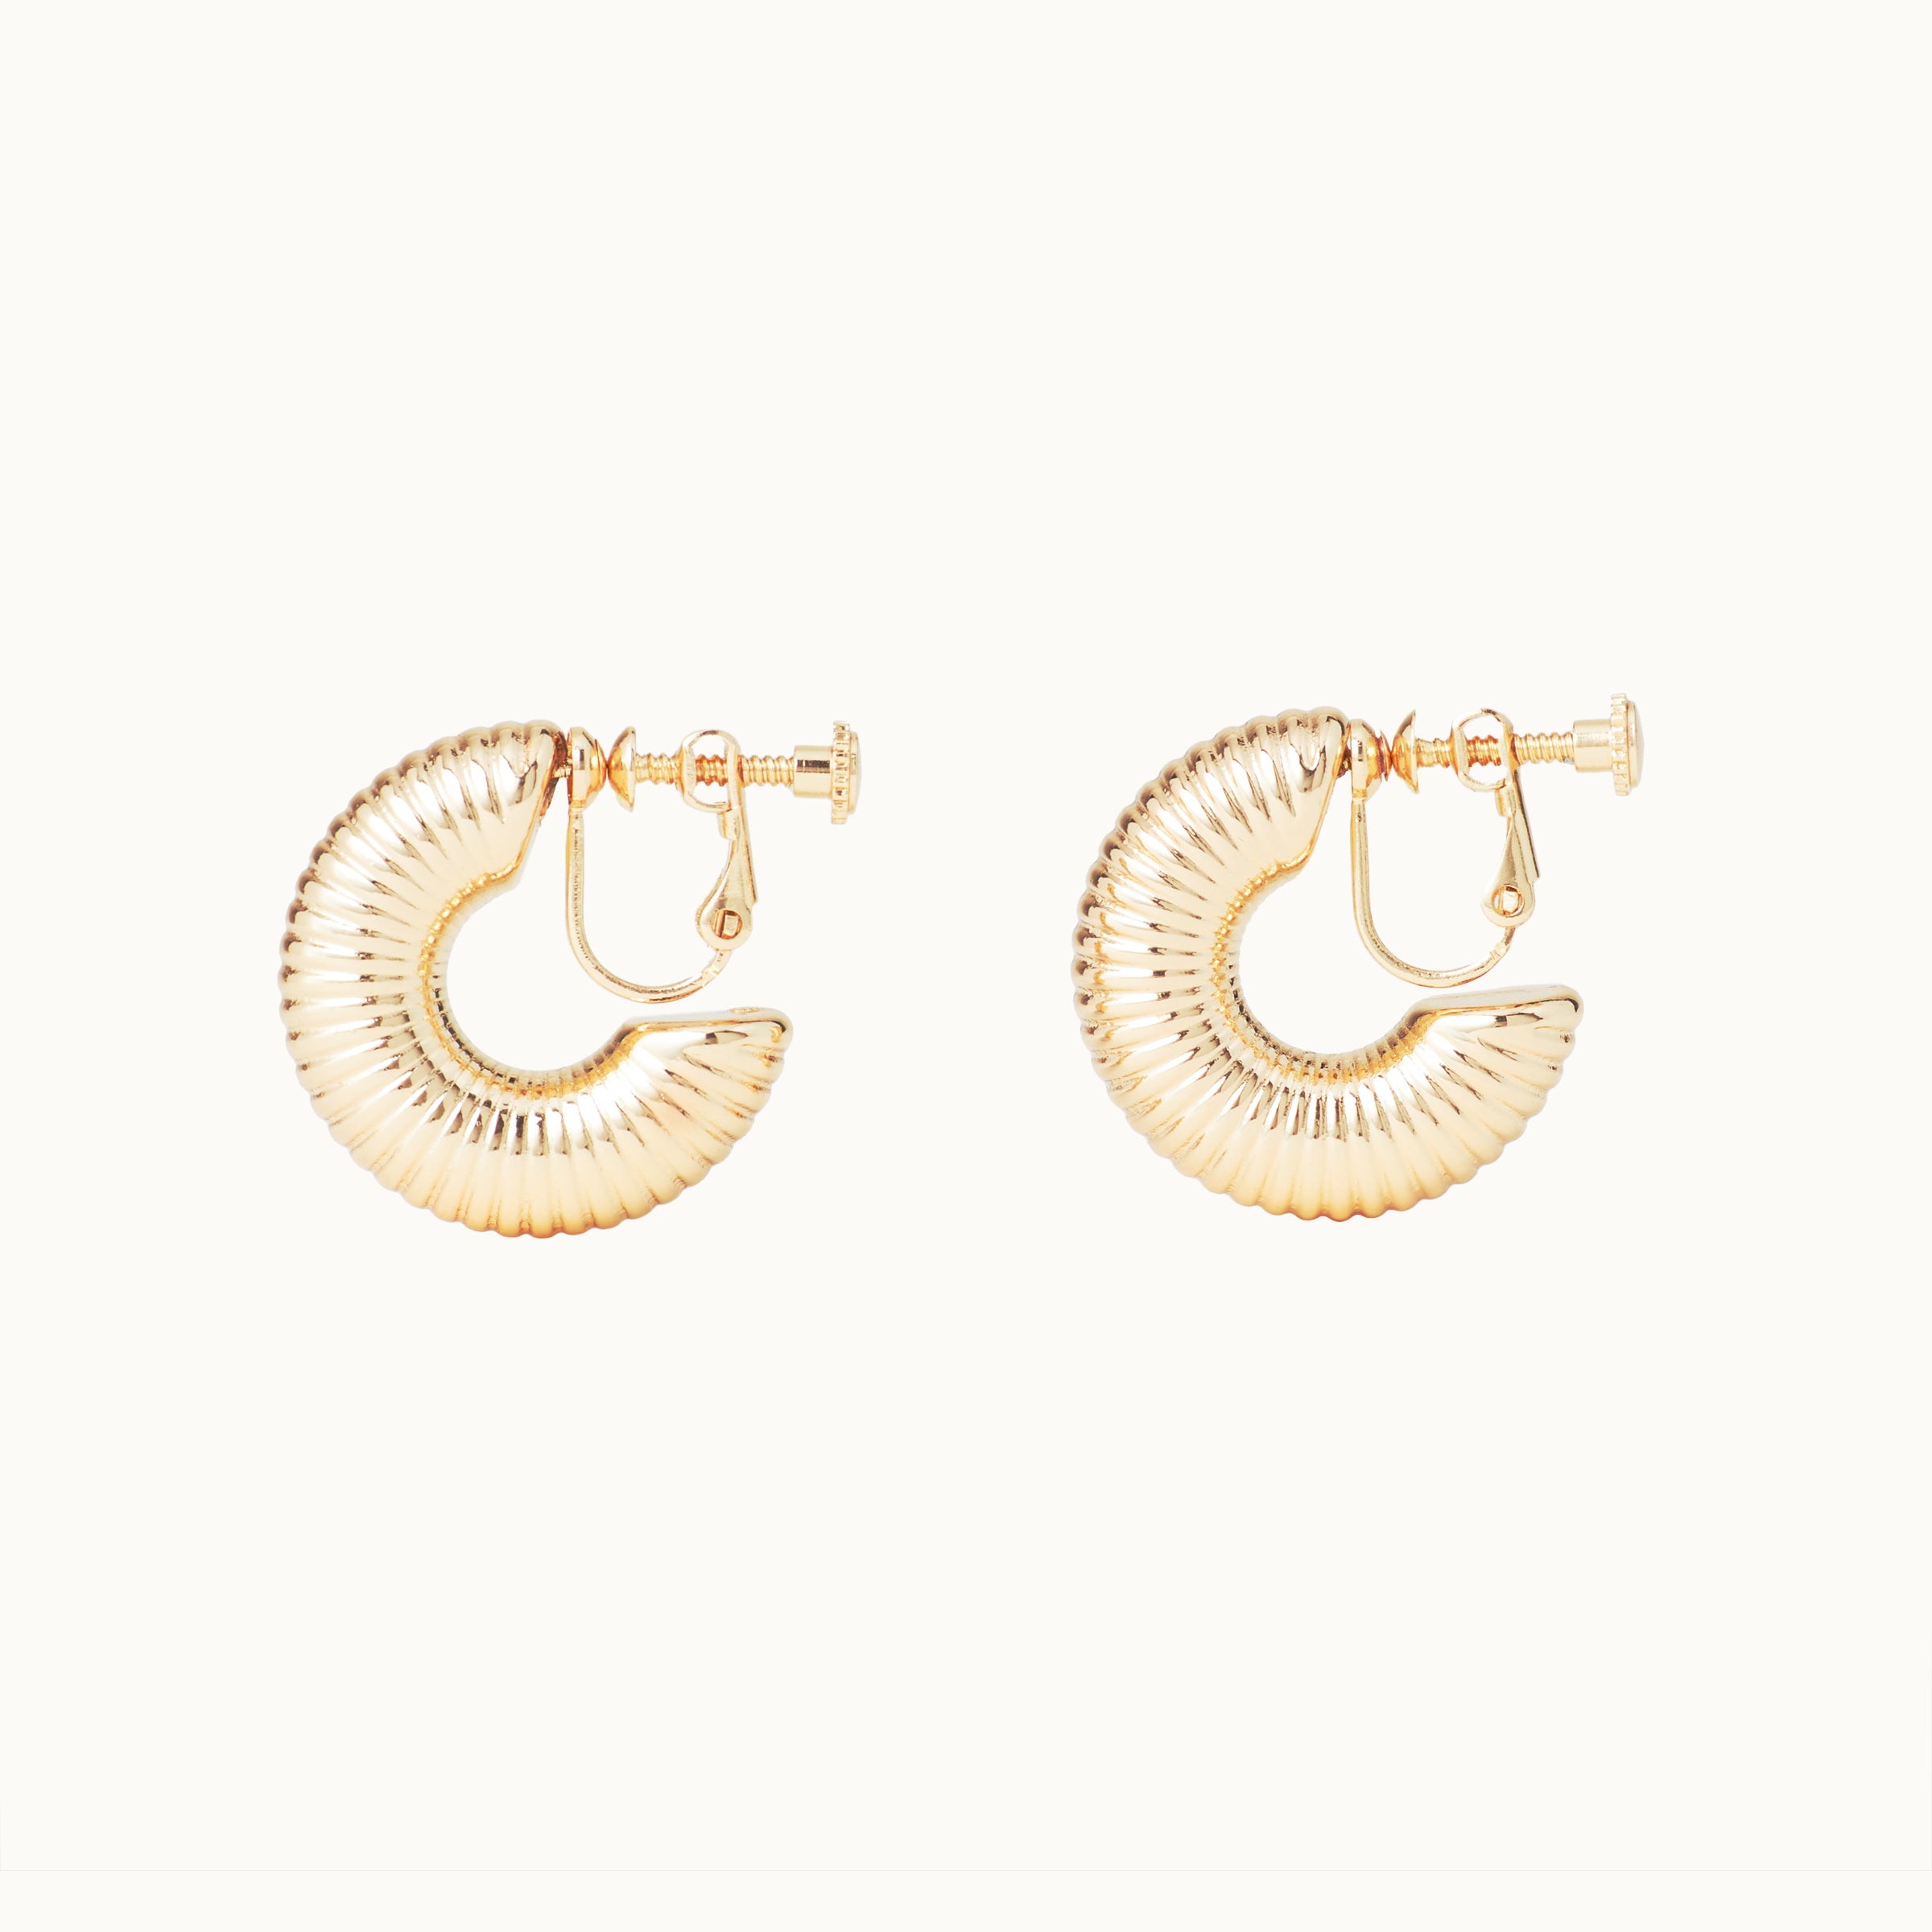 Image of the Bold Ribbed Hoop Clip On Earrings in Gold. Our screwback closure and manual adjustment capabilities cater to a wide range of needs, including thick, sensitive, small, and keloid-prone ears. Easily wear them for 8-12 hours for all-day fashion. Sold in pairs.